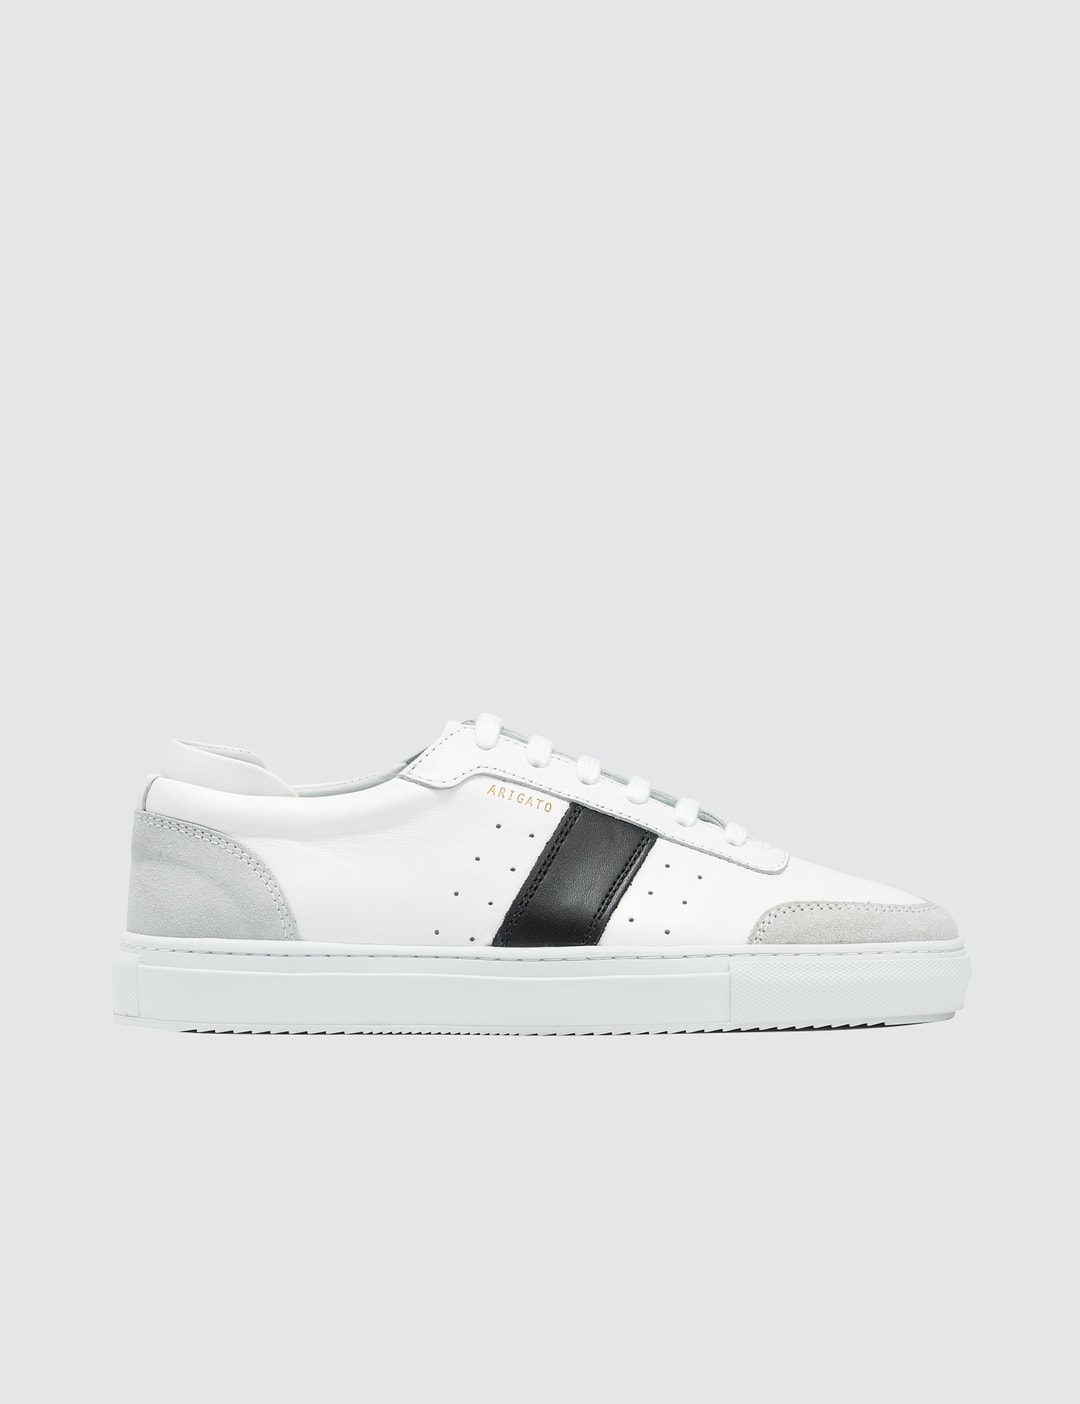 Axel Arigato - Dunk Sneakers | HBX - Globally Curated Fashion and ...